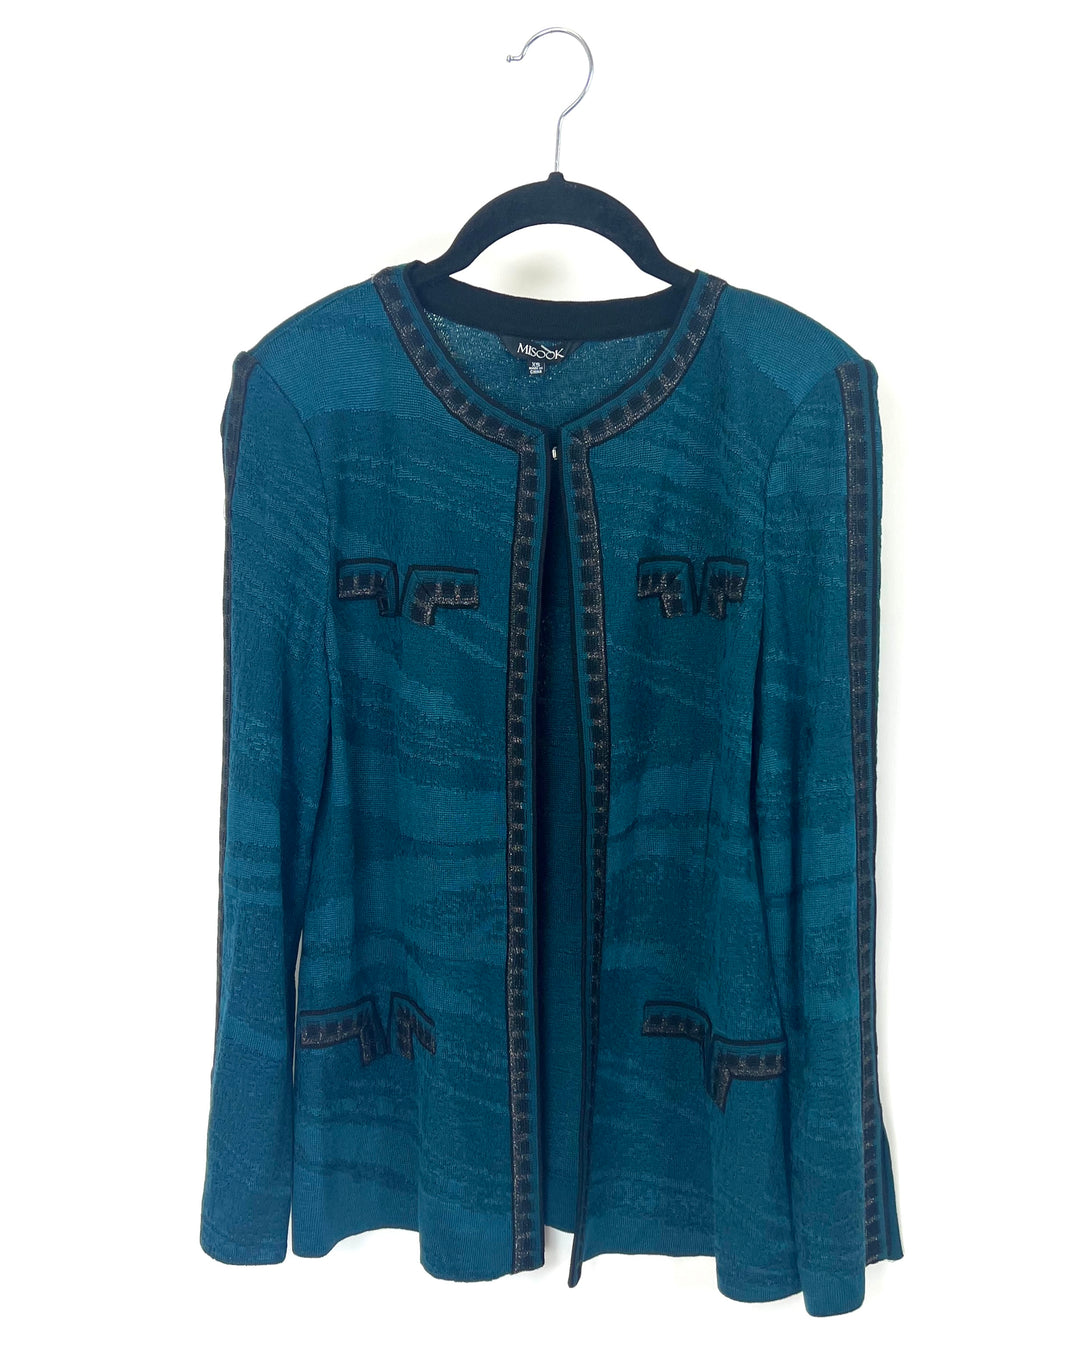 Teal and Black Cardigan - Size 2-4